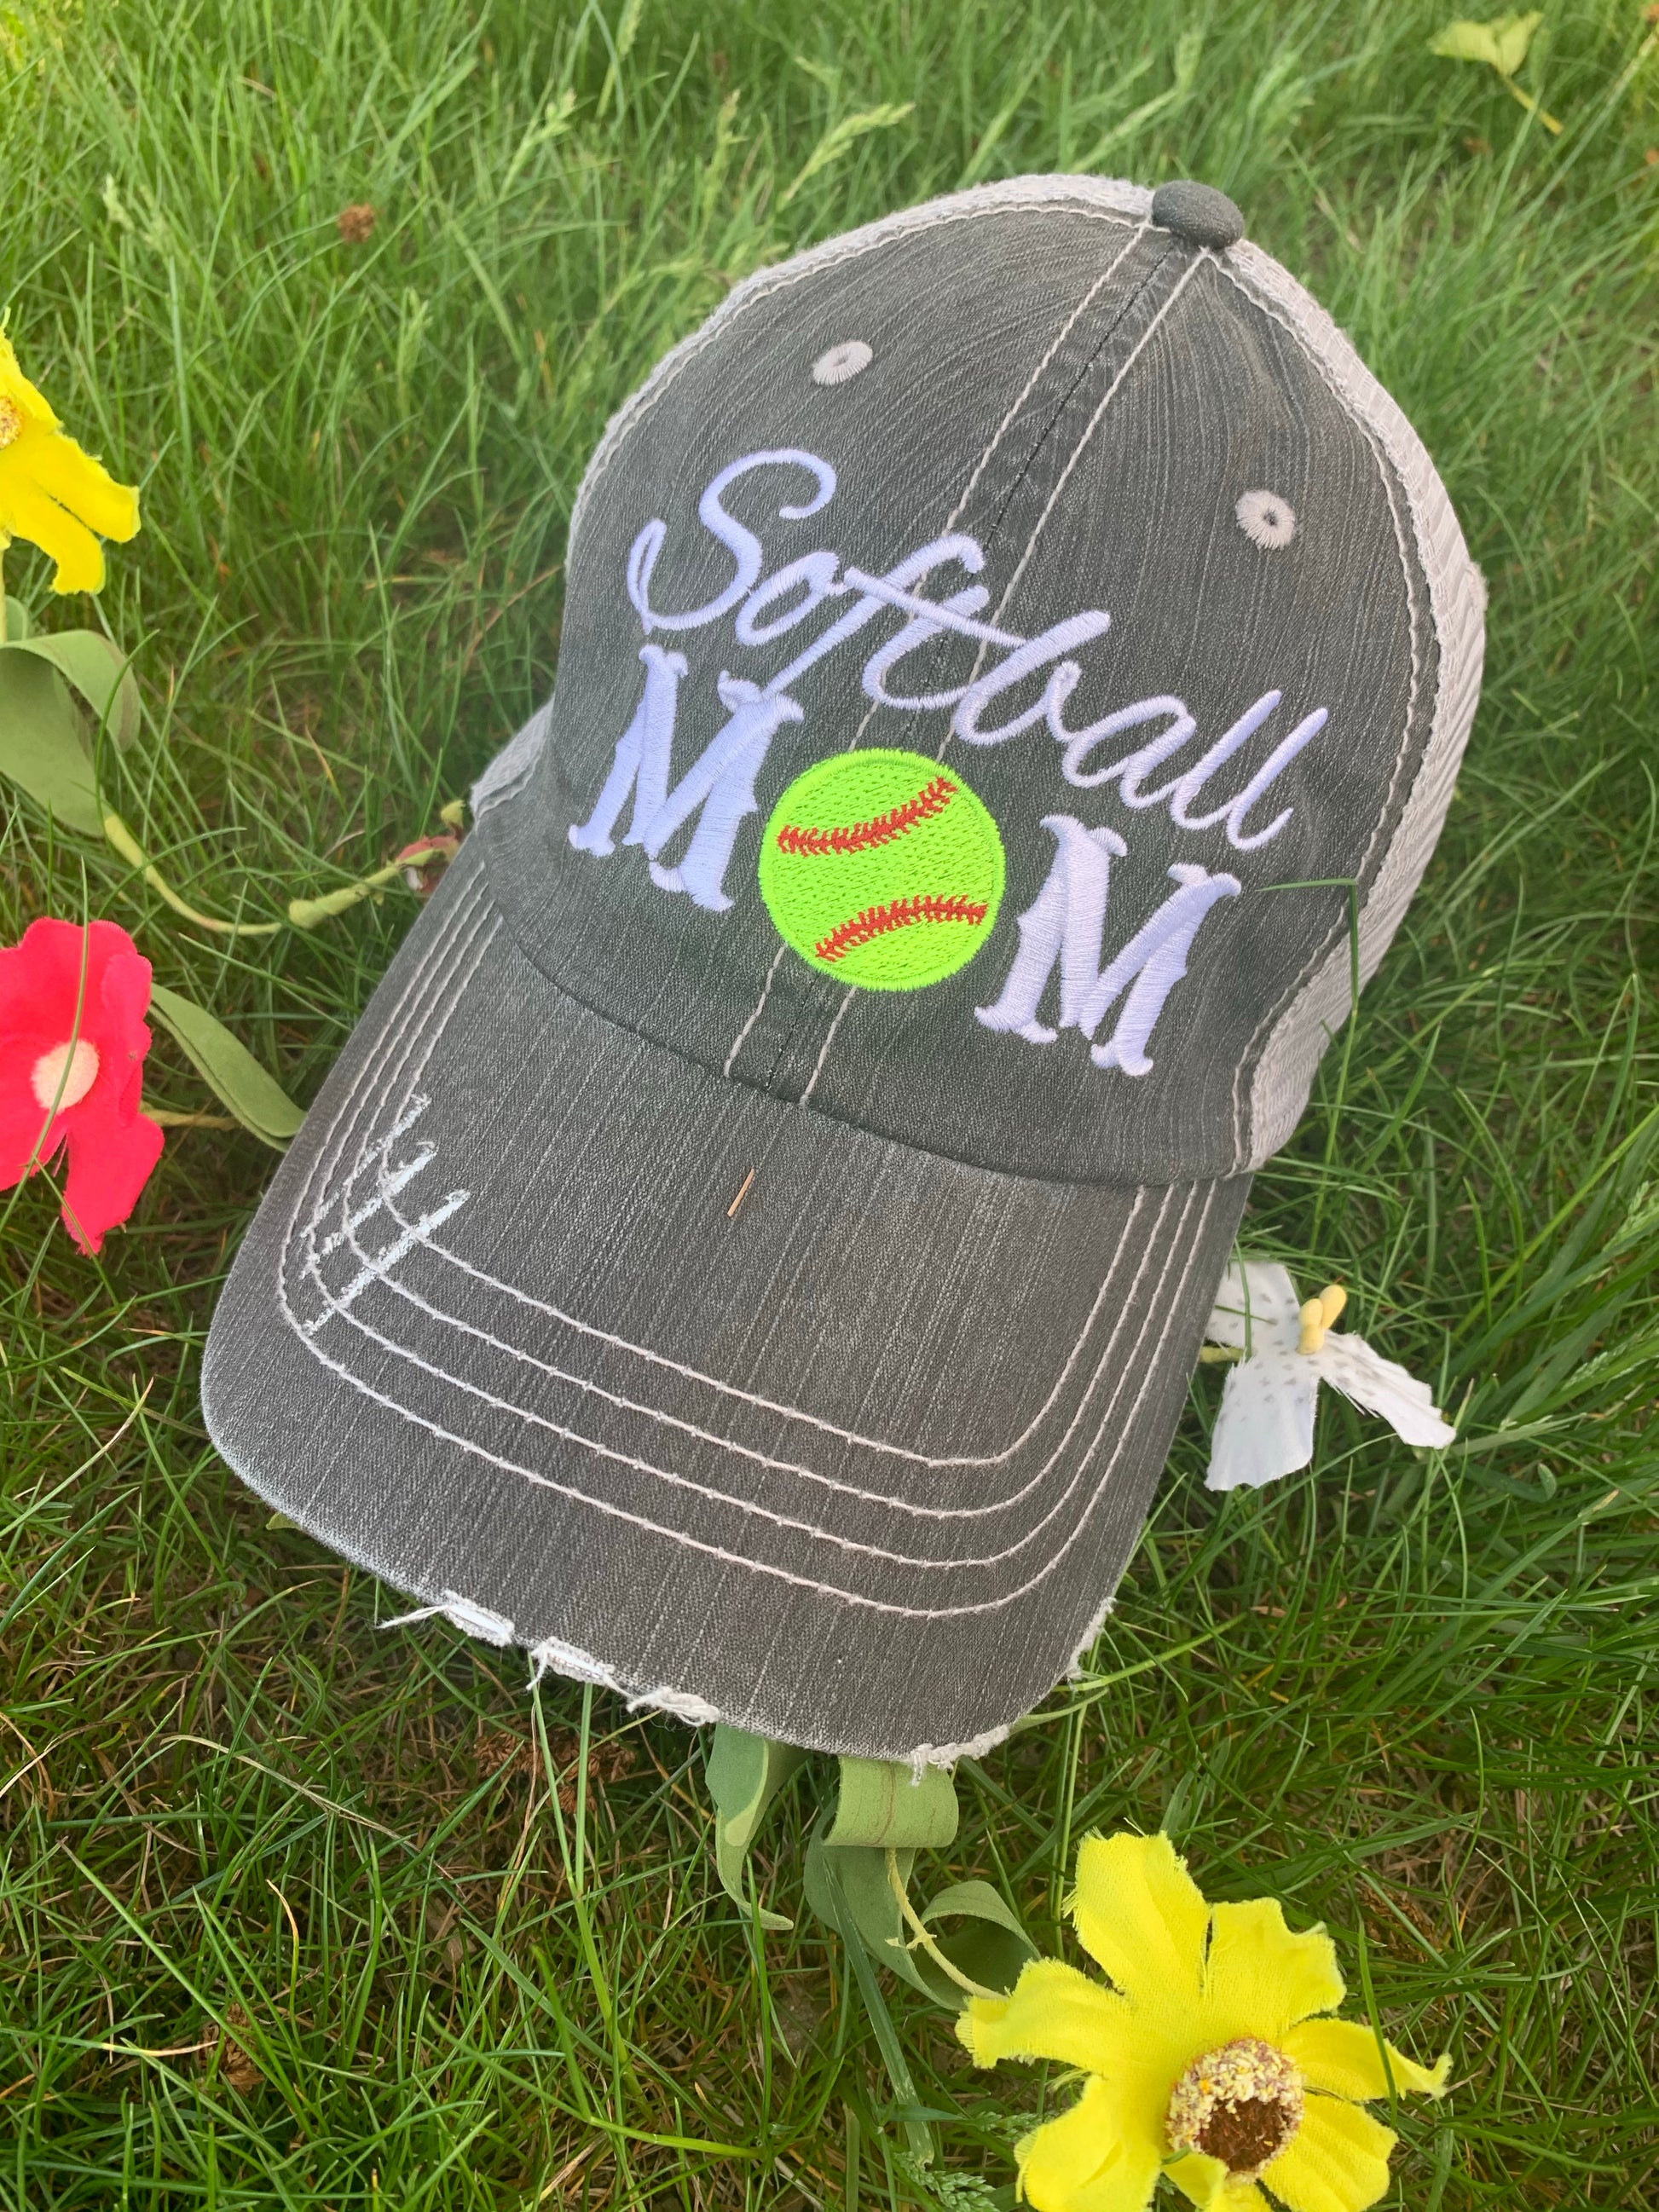 Softball hats Softball mom Softball hair dont care Embroidered gray distressed adjustable trucker caps Personalizable Softball forever - Stacy's Pink Martini Boutique